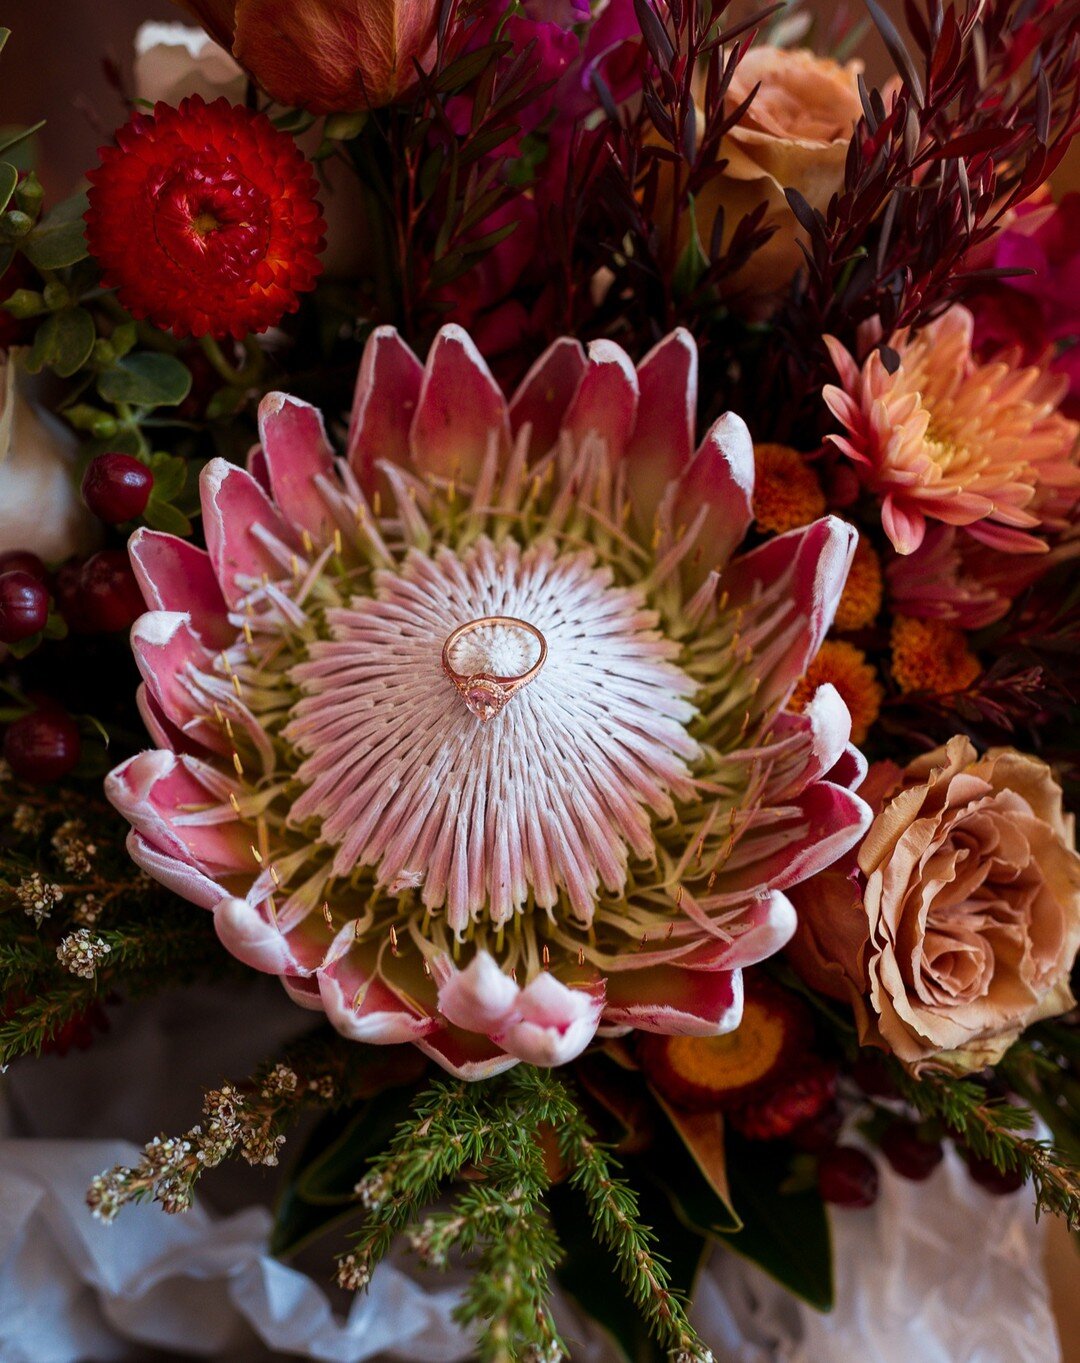 When there is a Protea in the bouquet that matches the engagement ring perfectly 😍😍😍